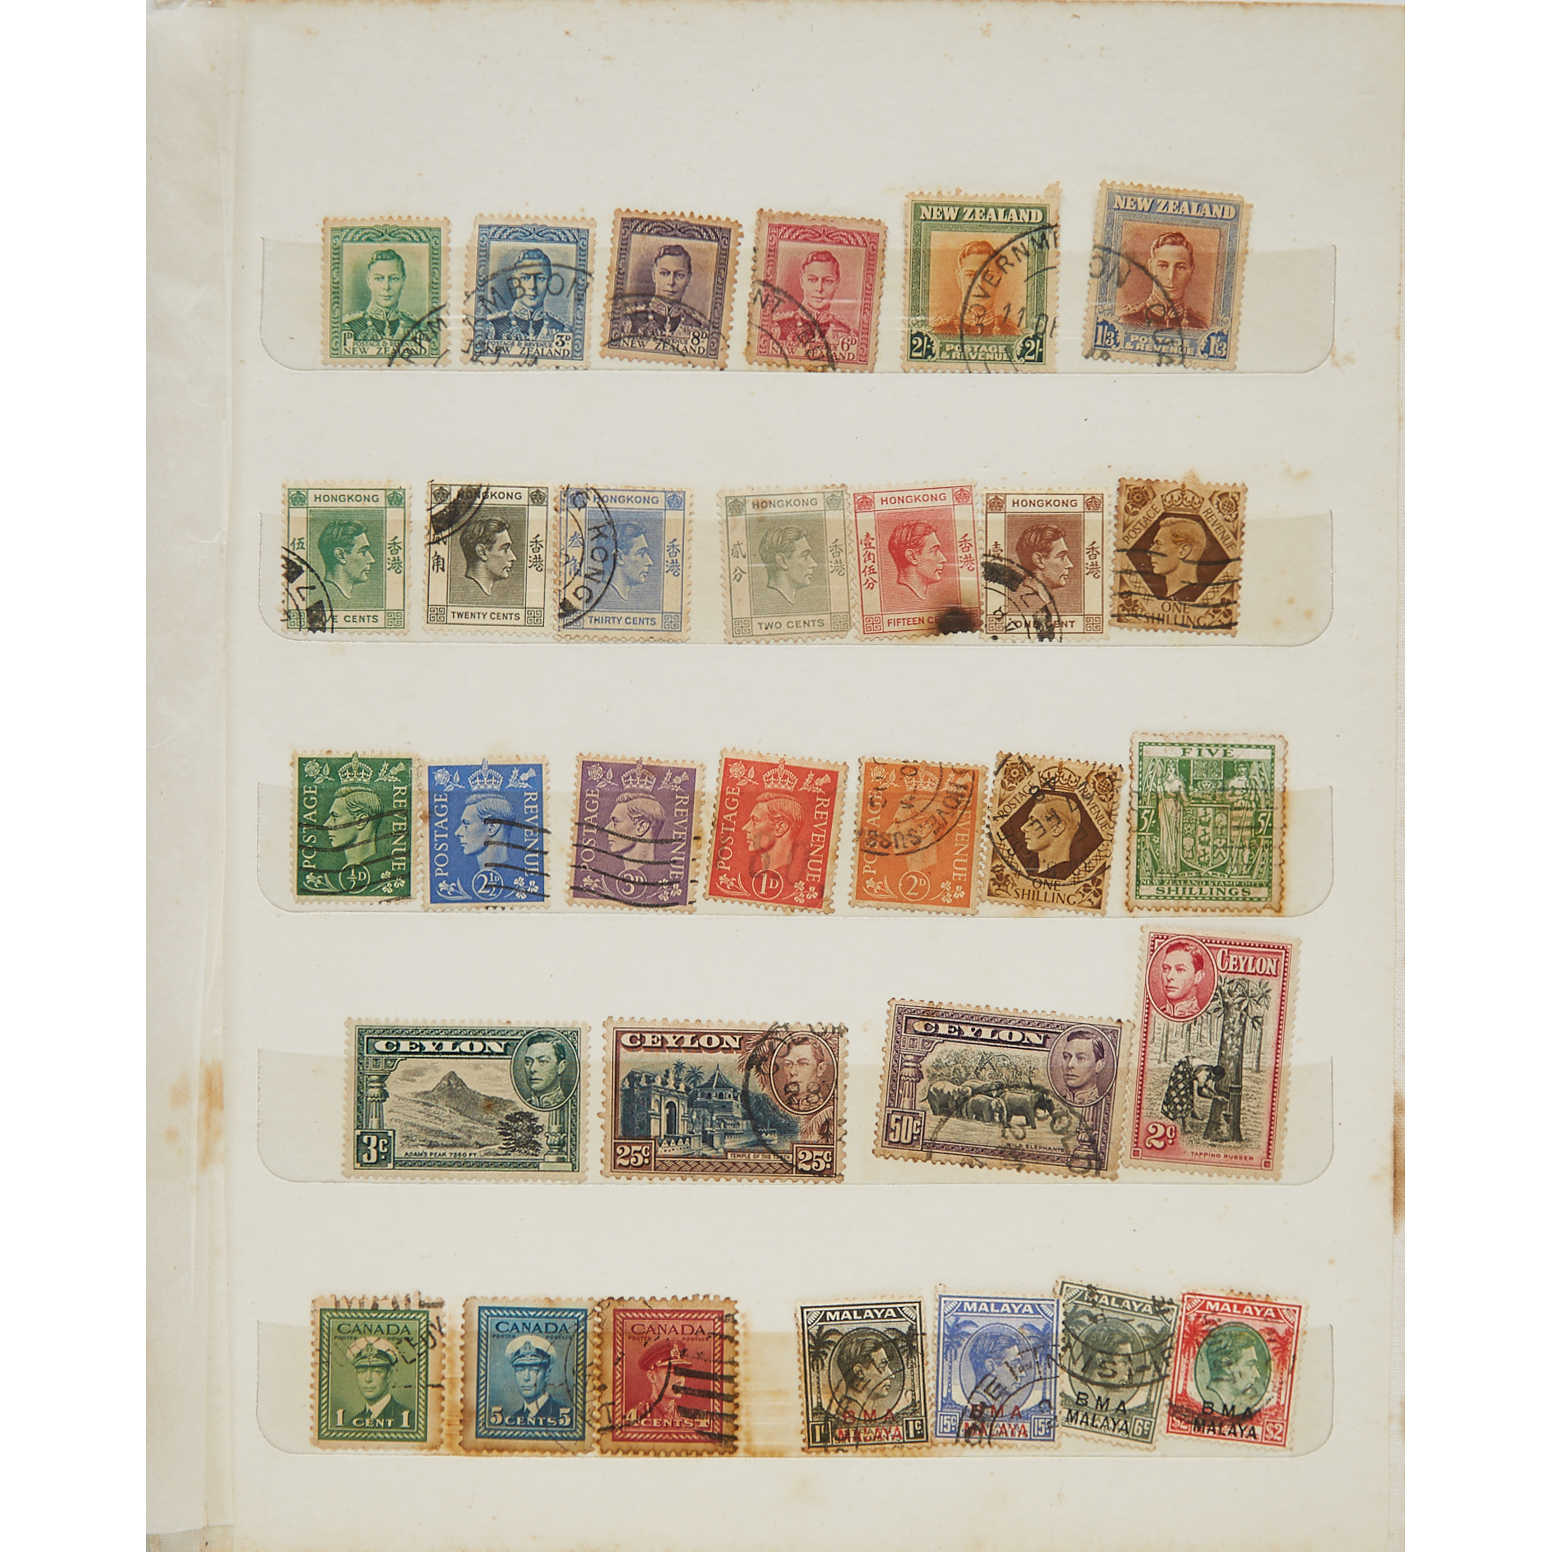 A Group of One Hundred and Eighty-One Stamps, Early 20th Century